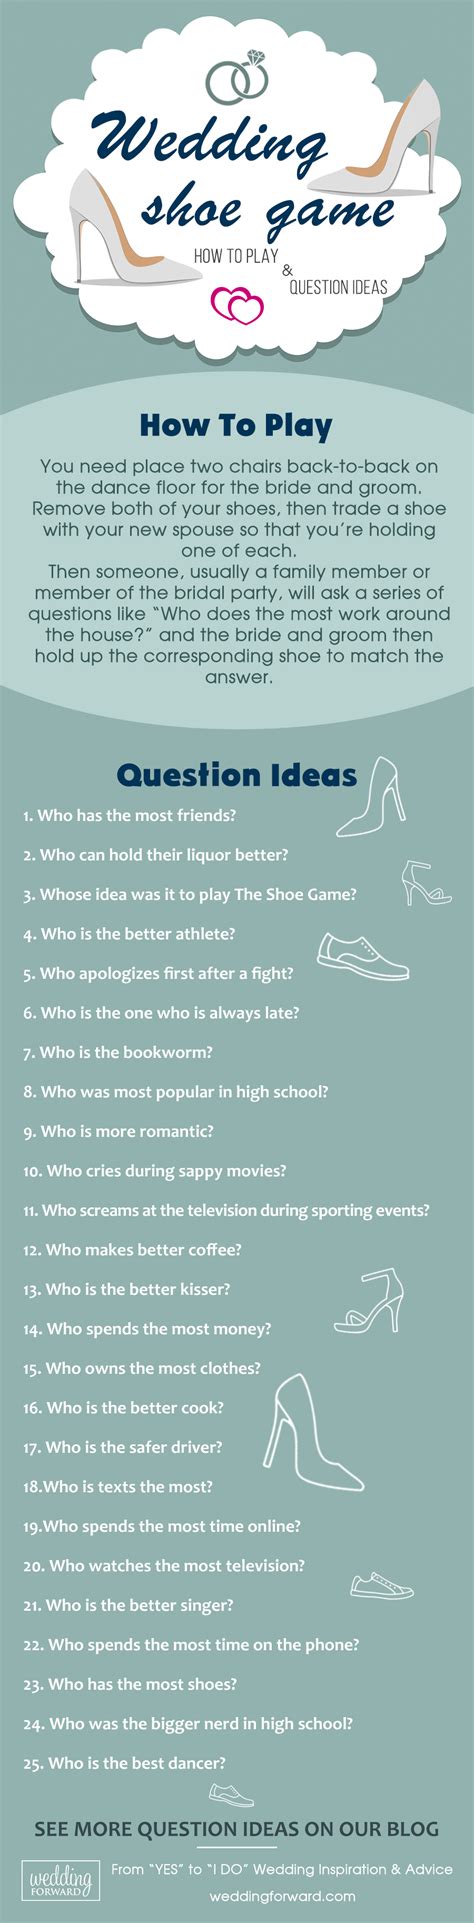 It was one of the most talked about moments. The Shoe Game - How To Play and Question Ideas ...